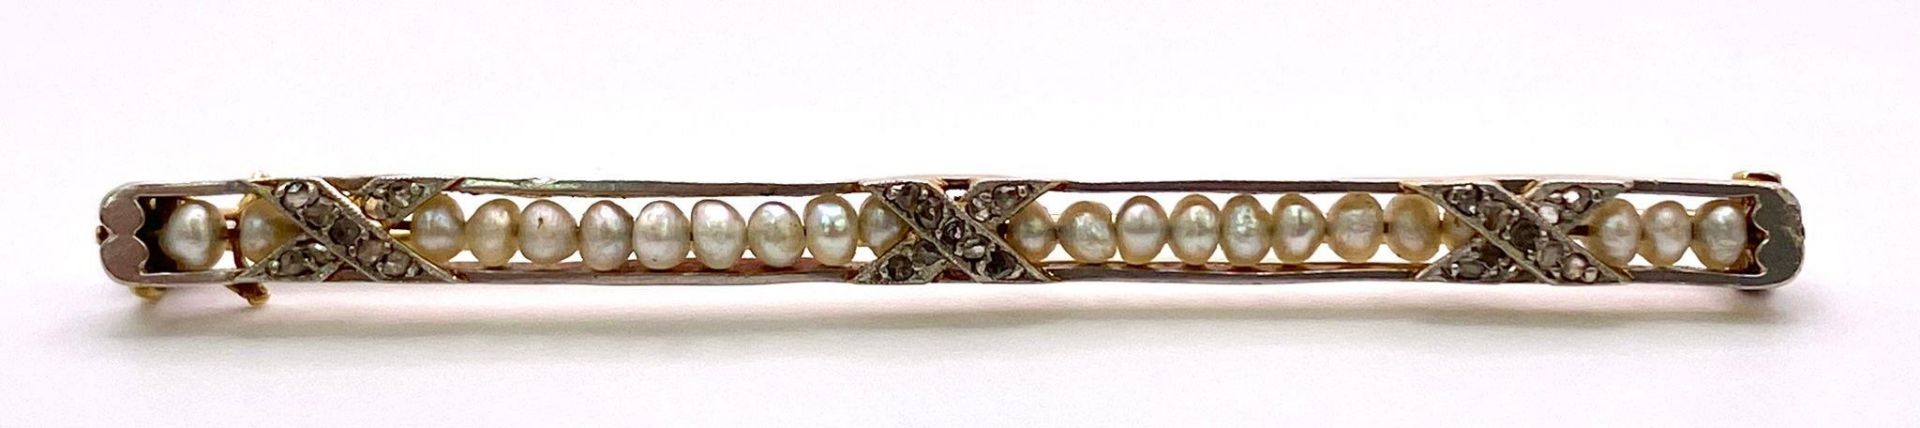 An Antique Mid-Karat Gold, Pearl and Diamond Bar Brooch. 6.5cm length. 5.24g total weight. - Image 2 of 4